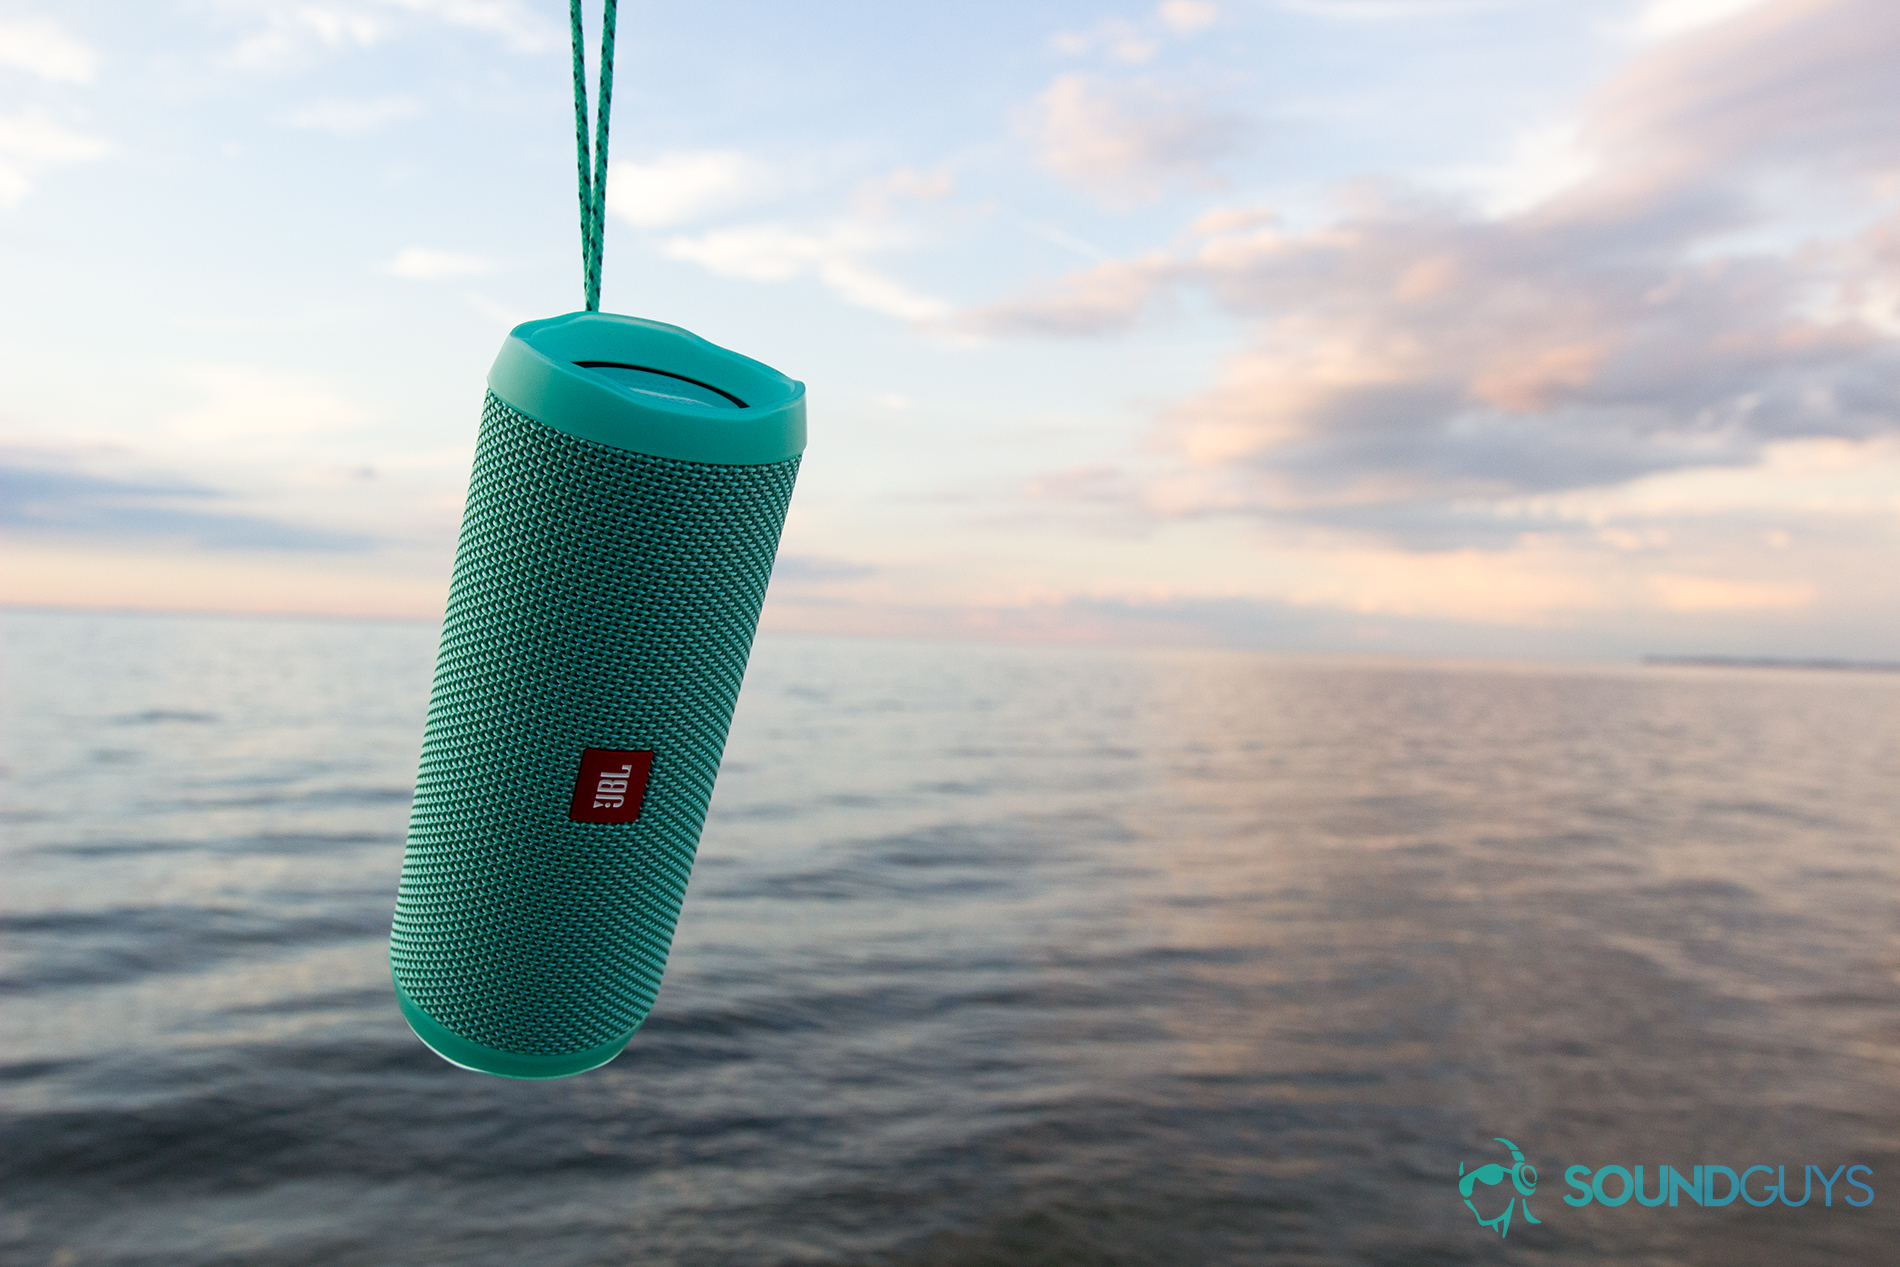 The JBL Flip 4 speaker dangling over a body of water; skies are minimally cloudy around sunset.